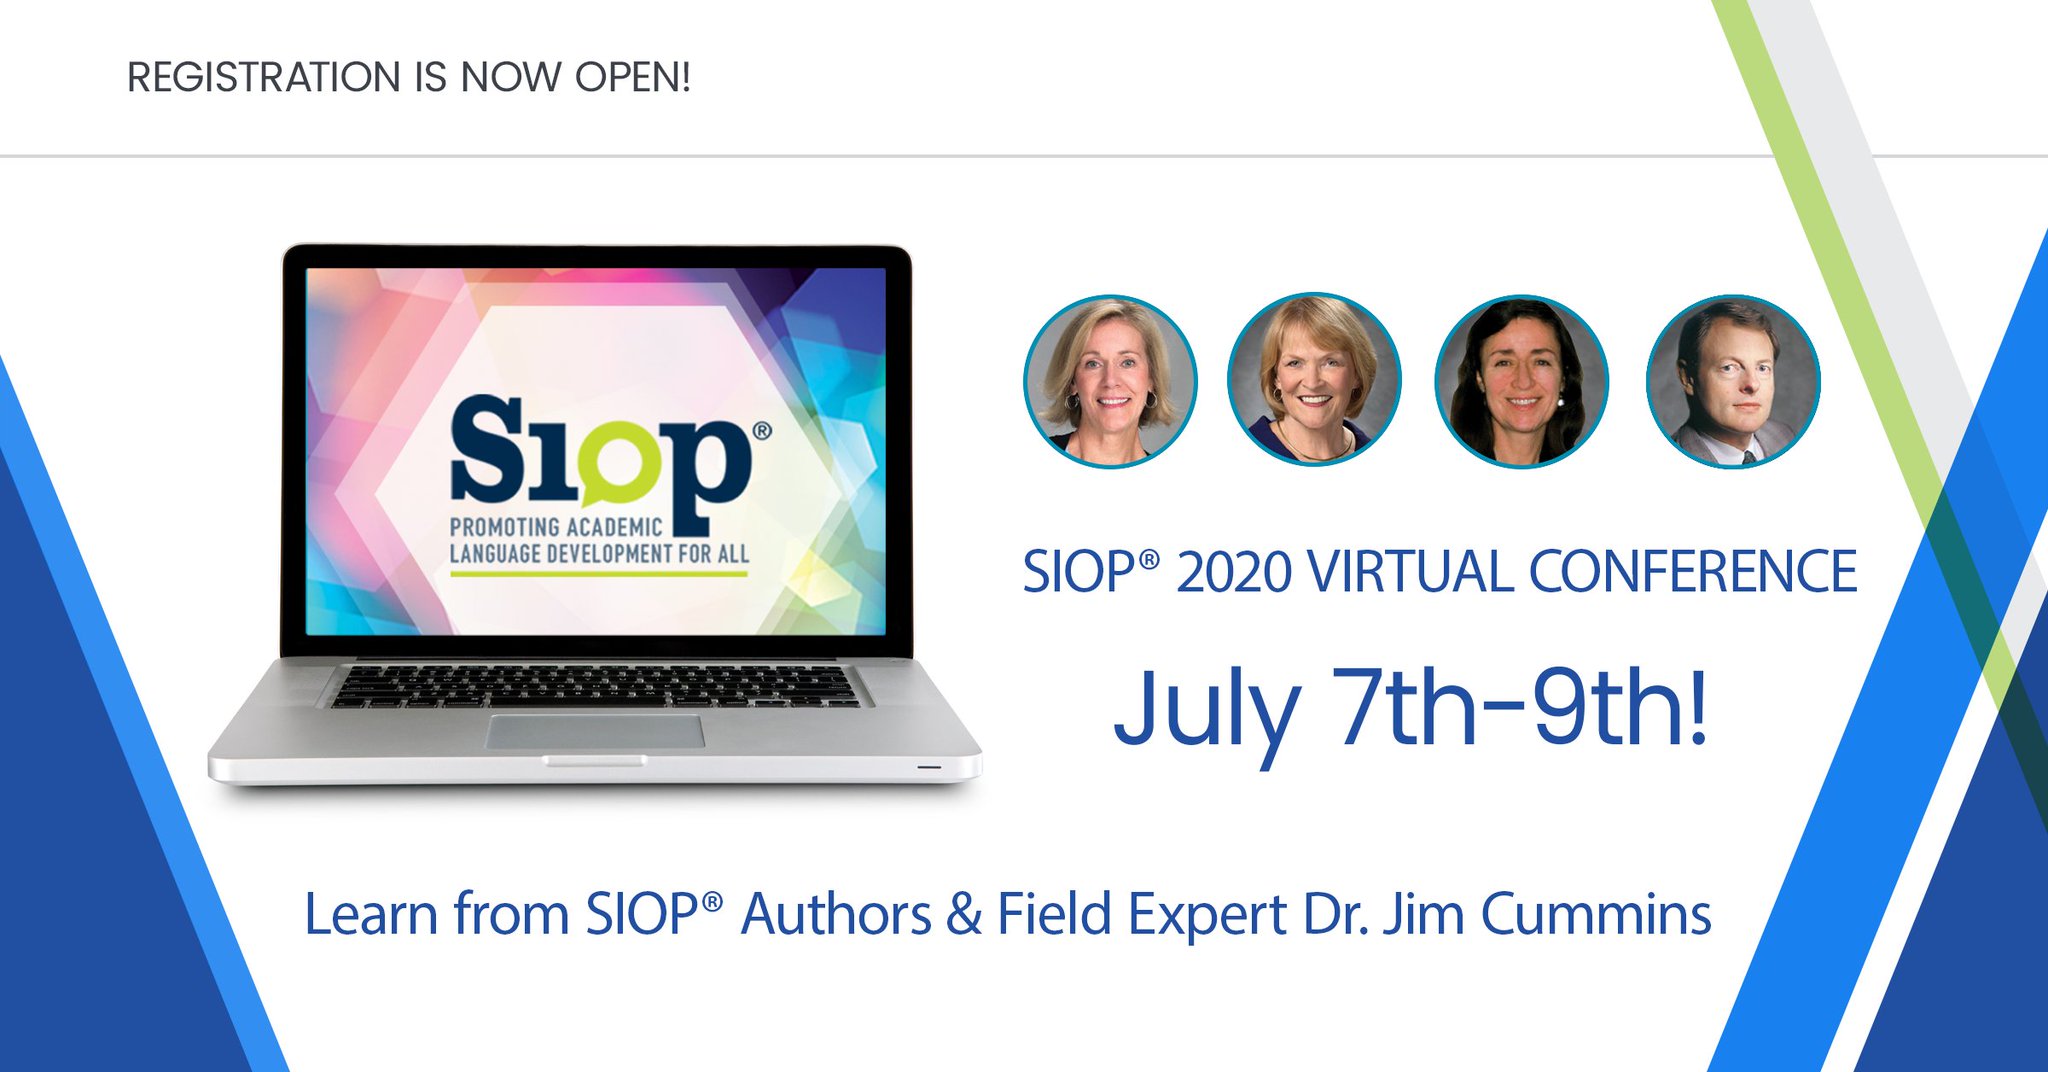 Savvas Learning on Twitter "💻The 2020 SIOP® Virtual Conference